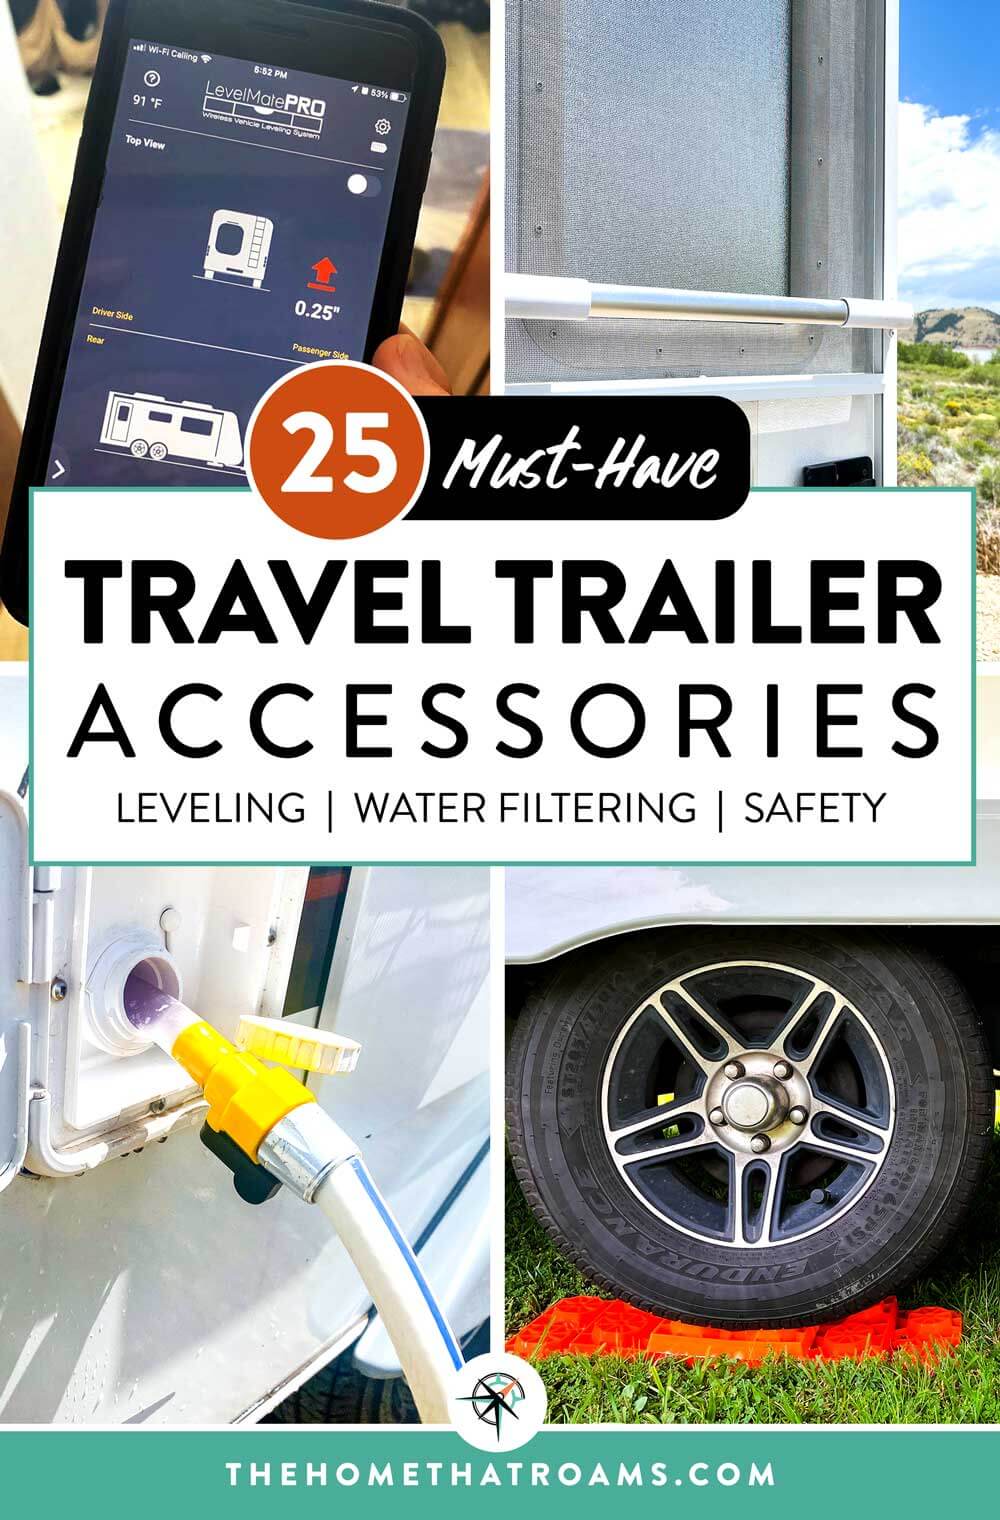 (Top left) Levelmate Pro app on an iPhone, (top right) crossbar on travel trailer screendoor, (bottom left) water hose filling an RV water tank, (bottom right) and leveling blocks under a travel trailer tire.